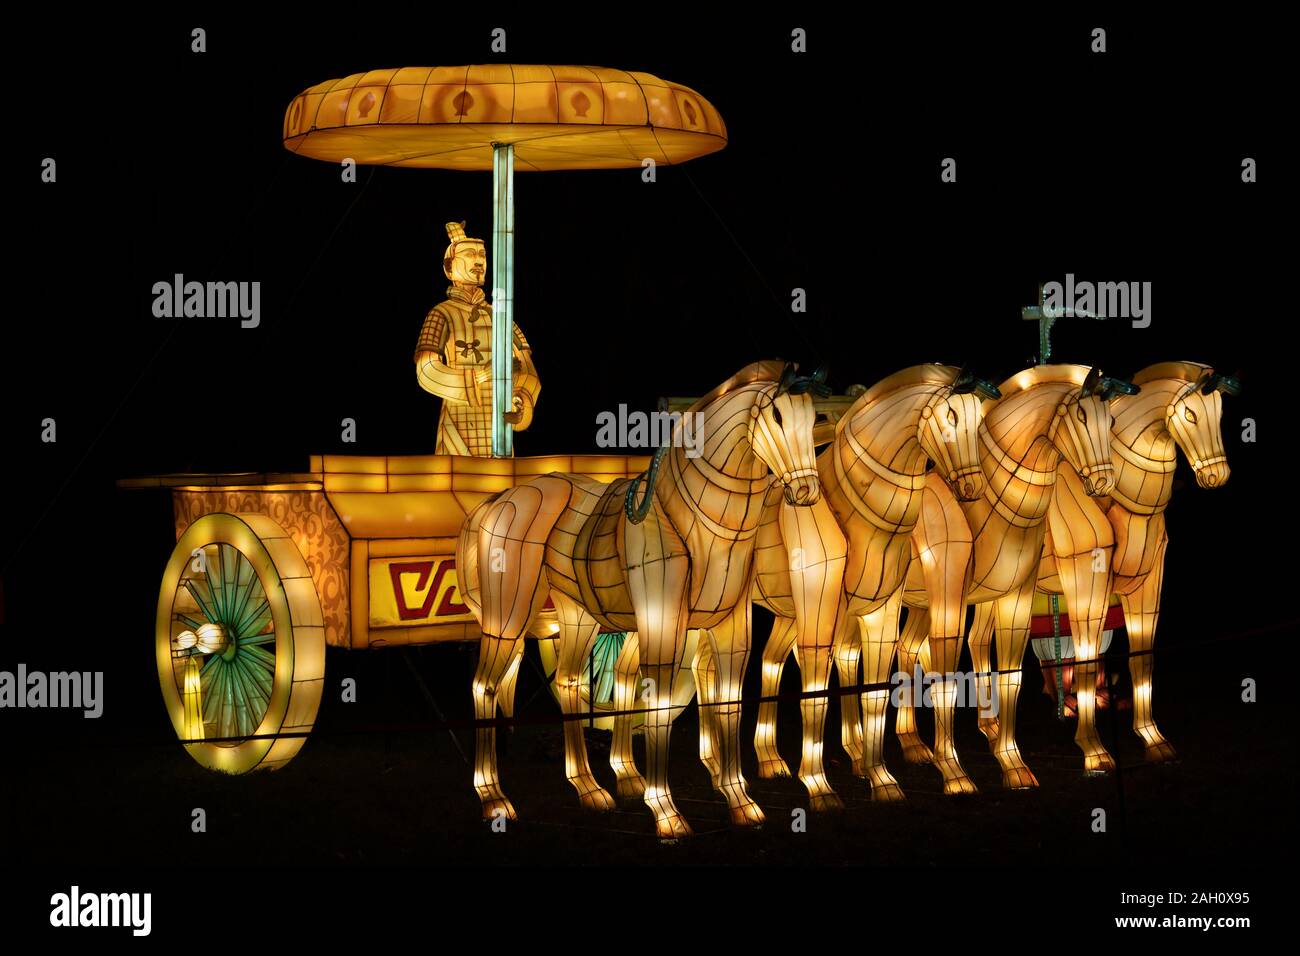 Warsaw, Poland - December 16, 2019: Emperor in chariot and four horses at Chinese Light Festival, traditional Chinese culture exhibition at night at F Stock Photo